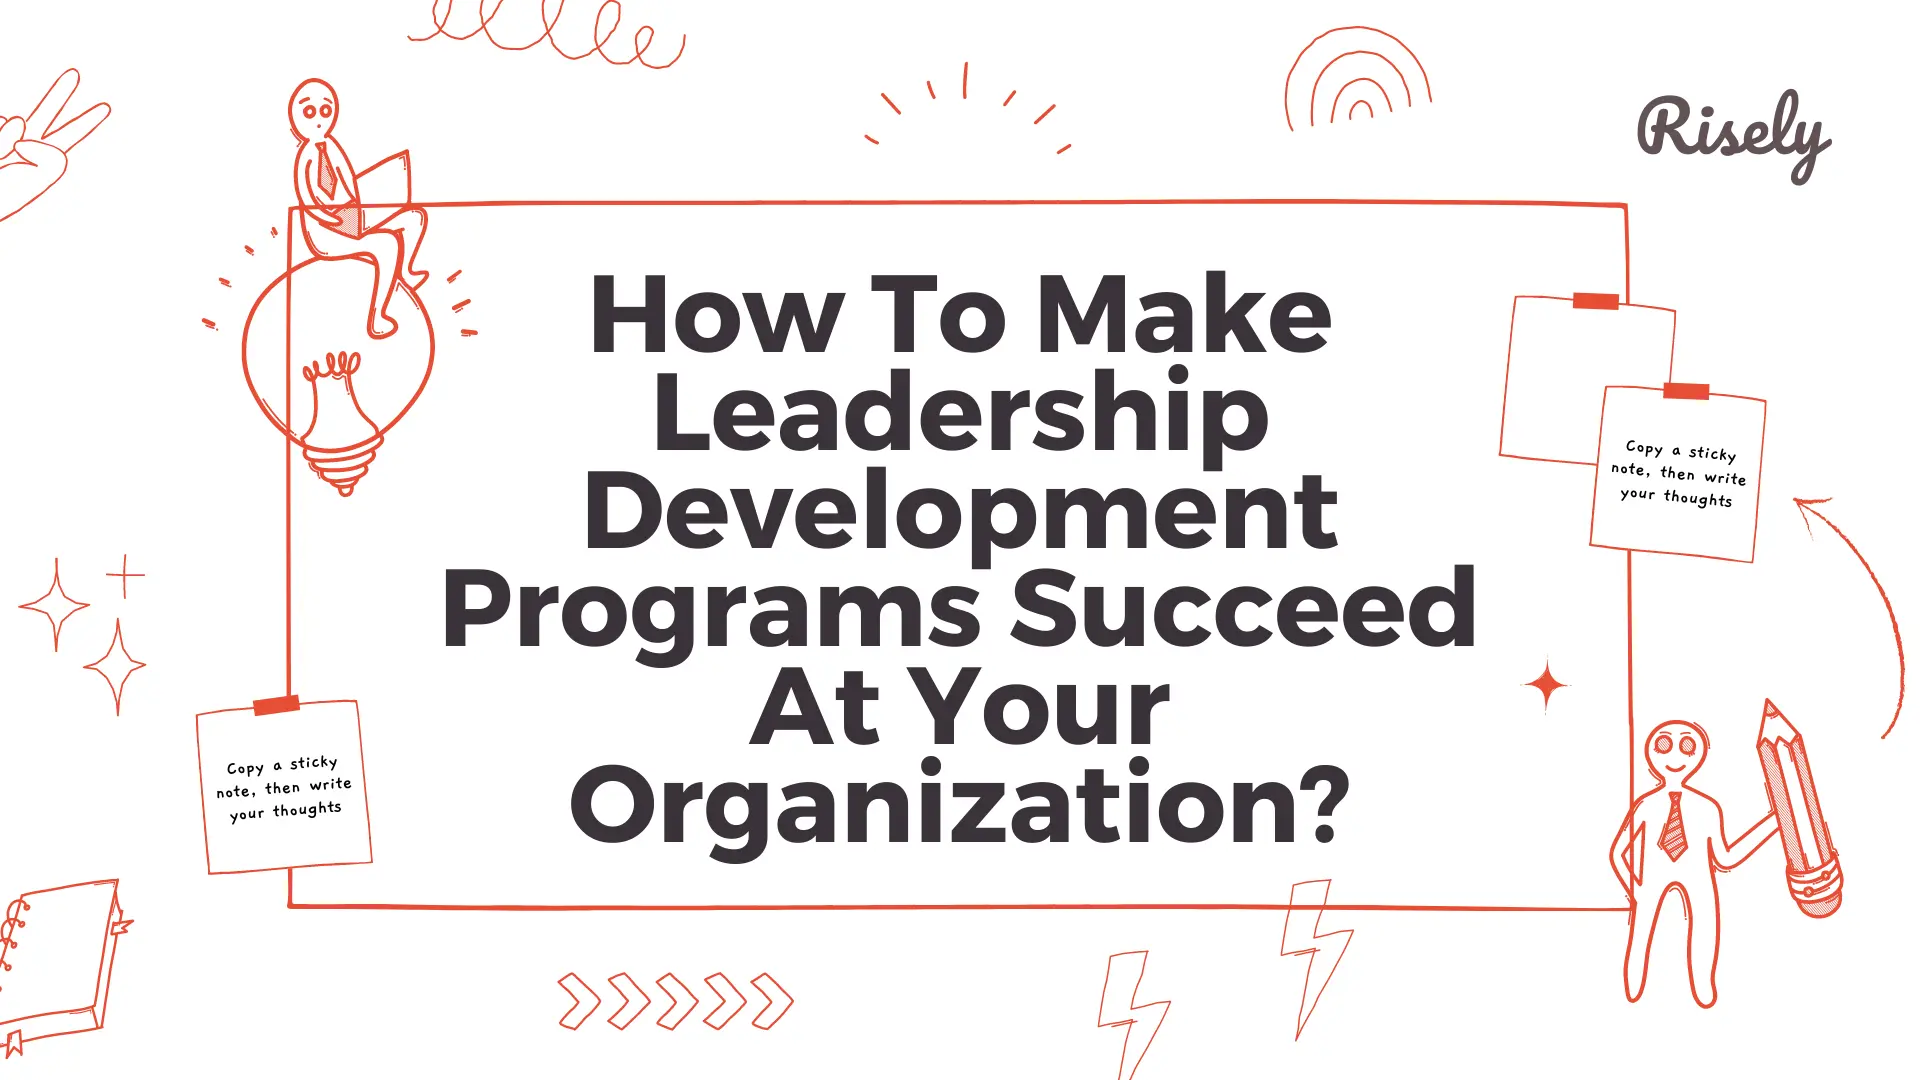 How To Make Leadership Development Programs Succeed In Your Organization?